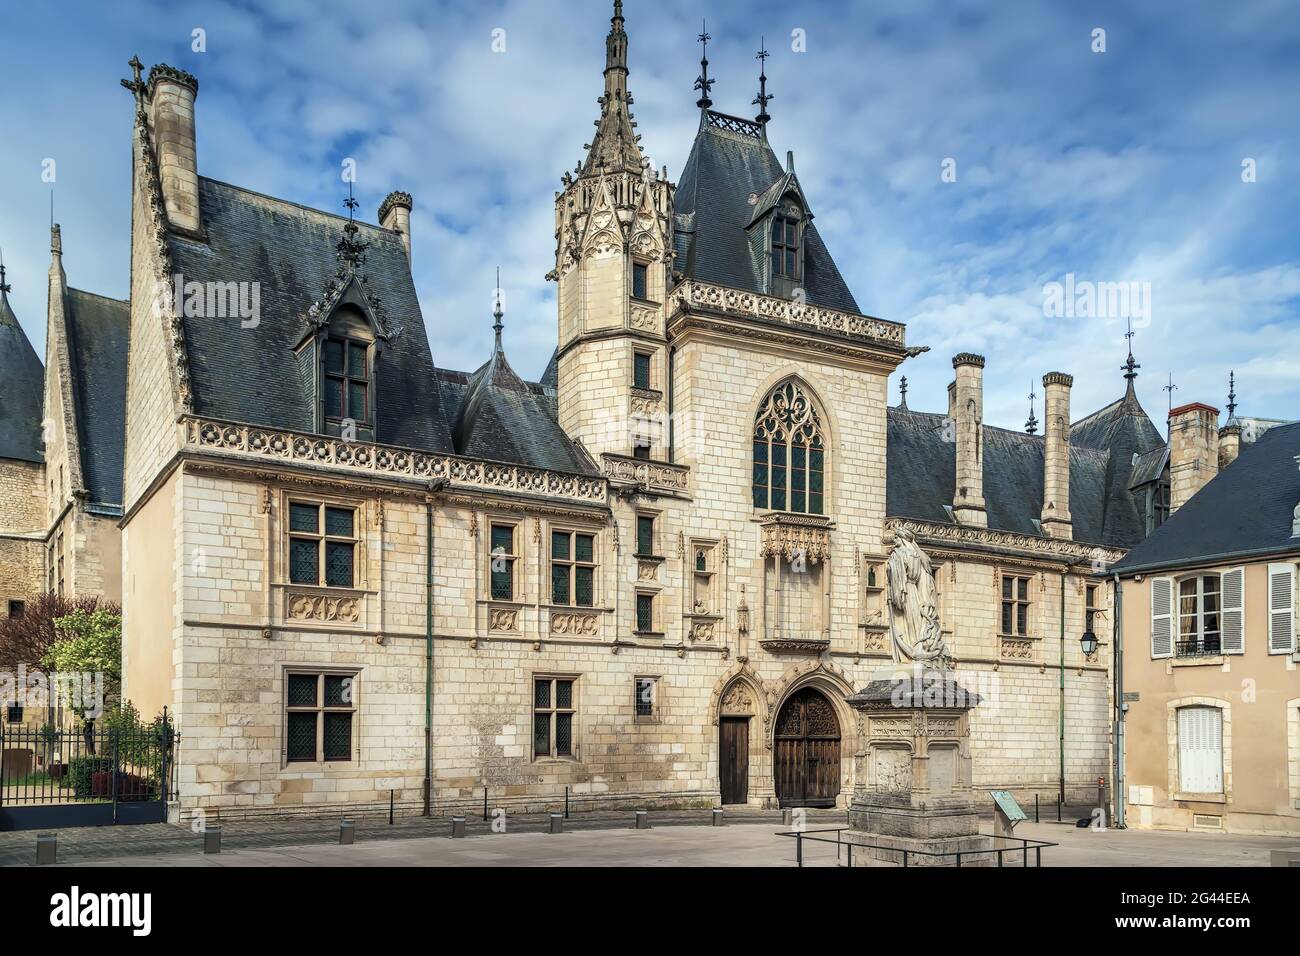 Jacques Coeur Palace, Bourges, Frankreich Stockfoto